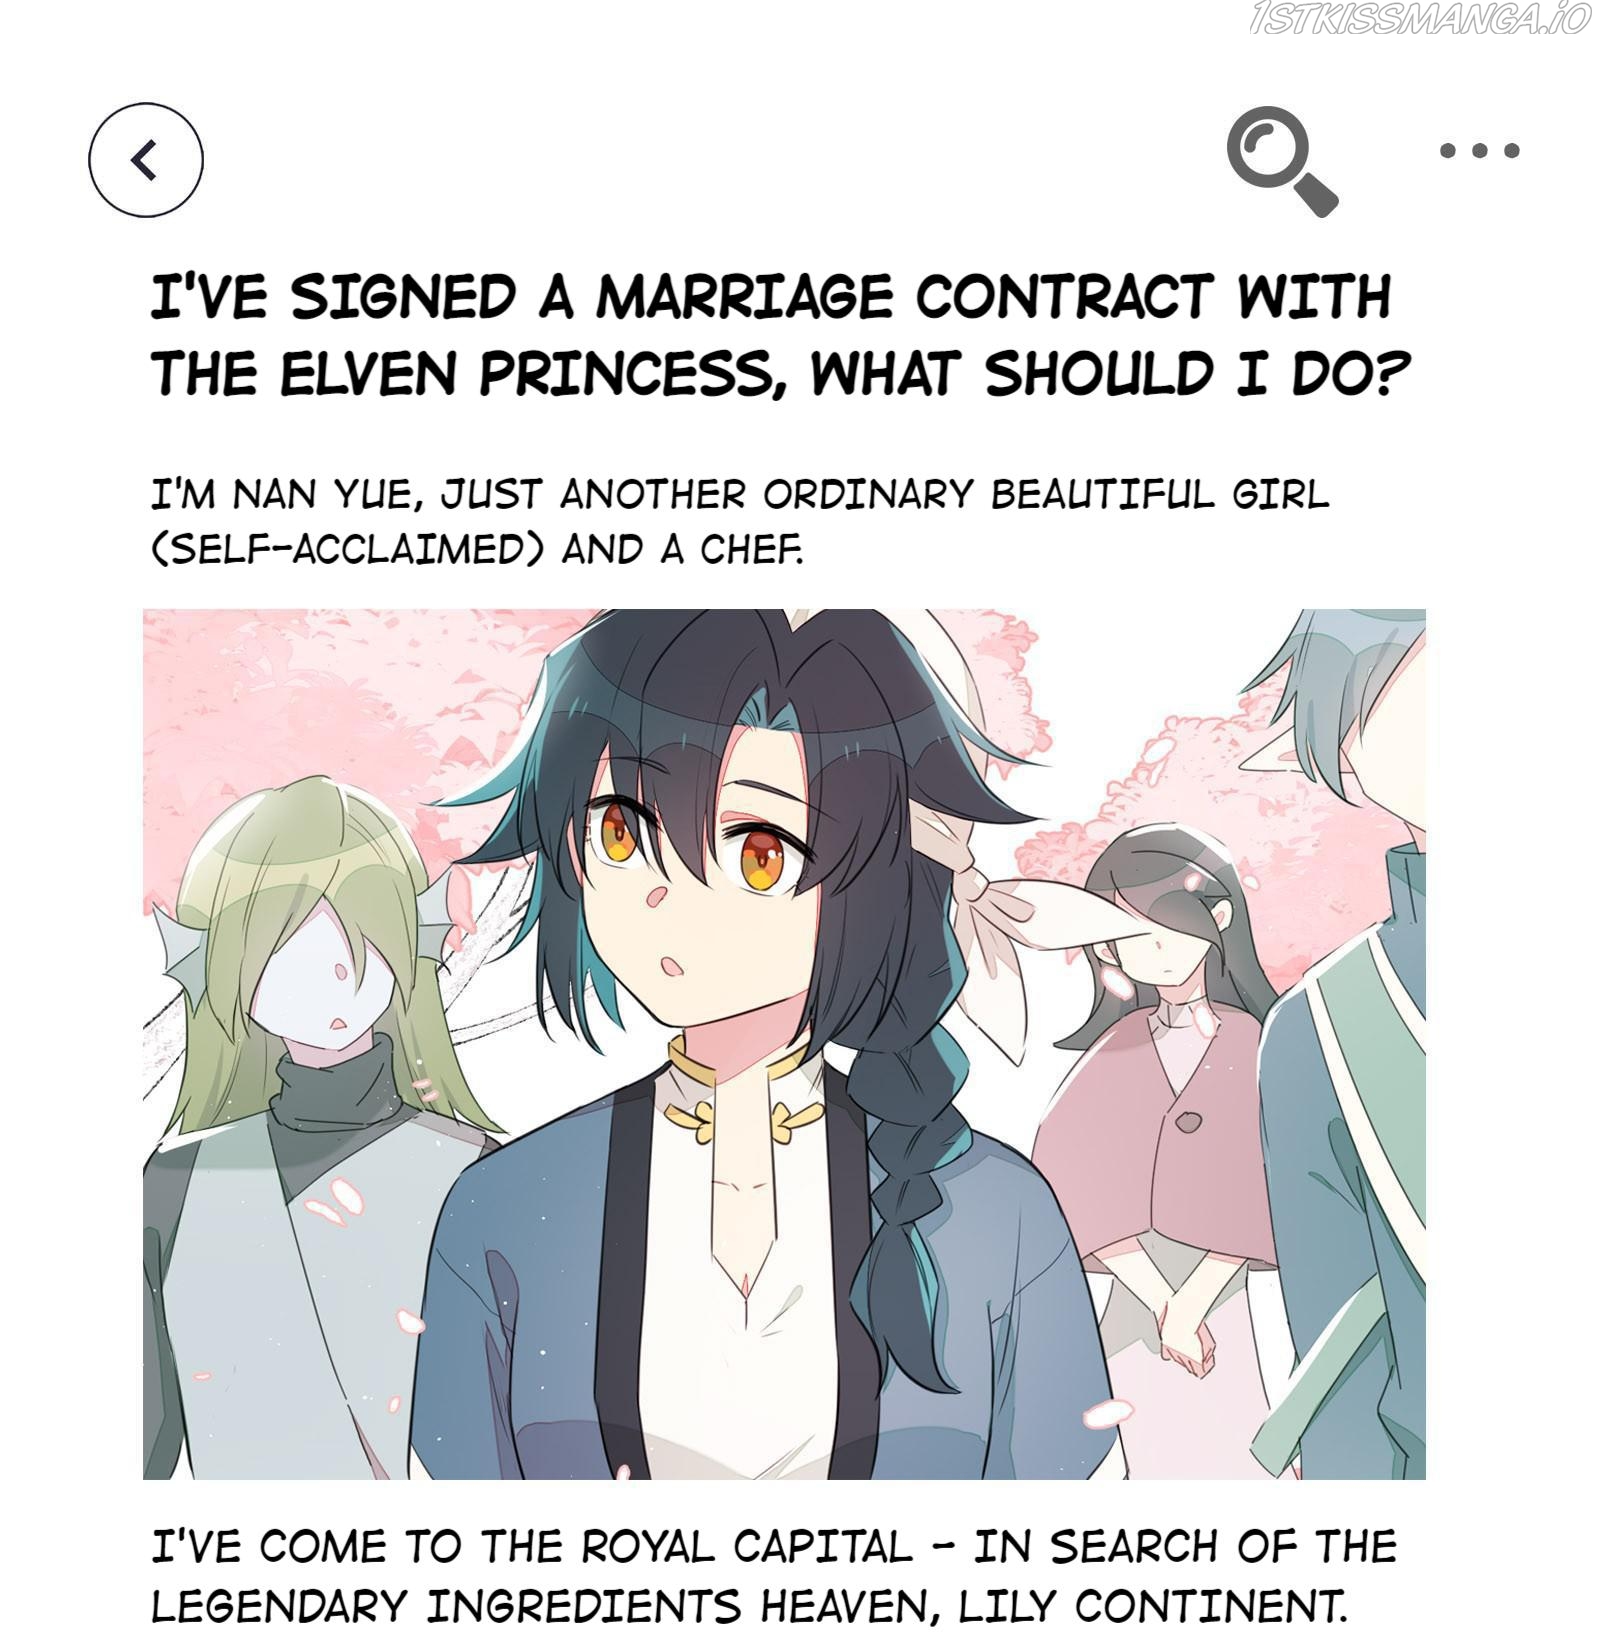 What Should I Do If I’Ve Signed A Marriage Contract With The Elven Princess - Page 1